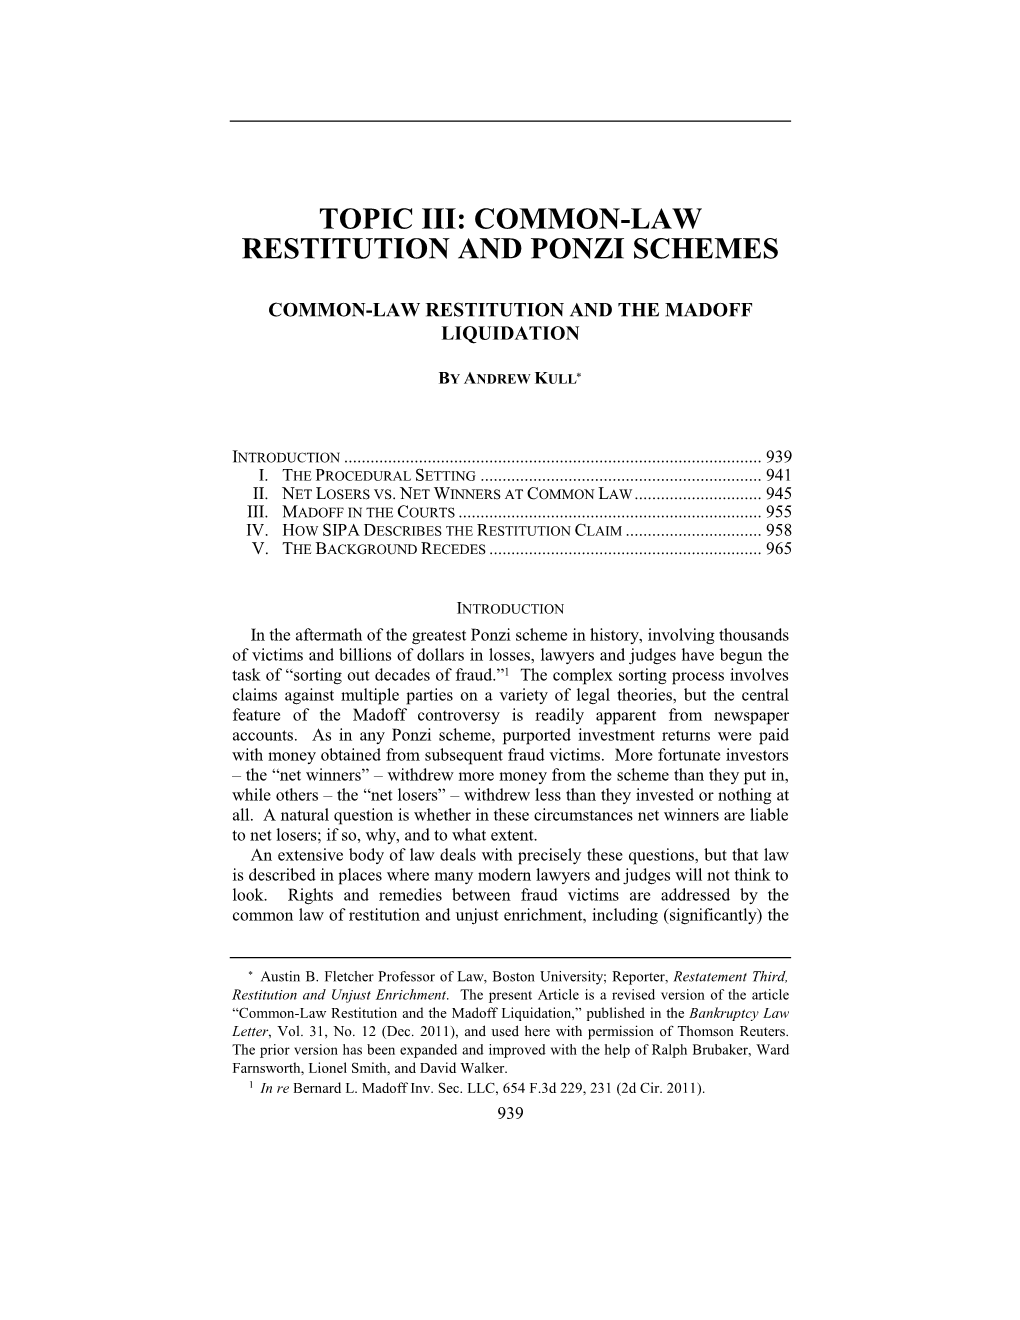 Common-Law Restitution and Ponzi Schemes